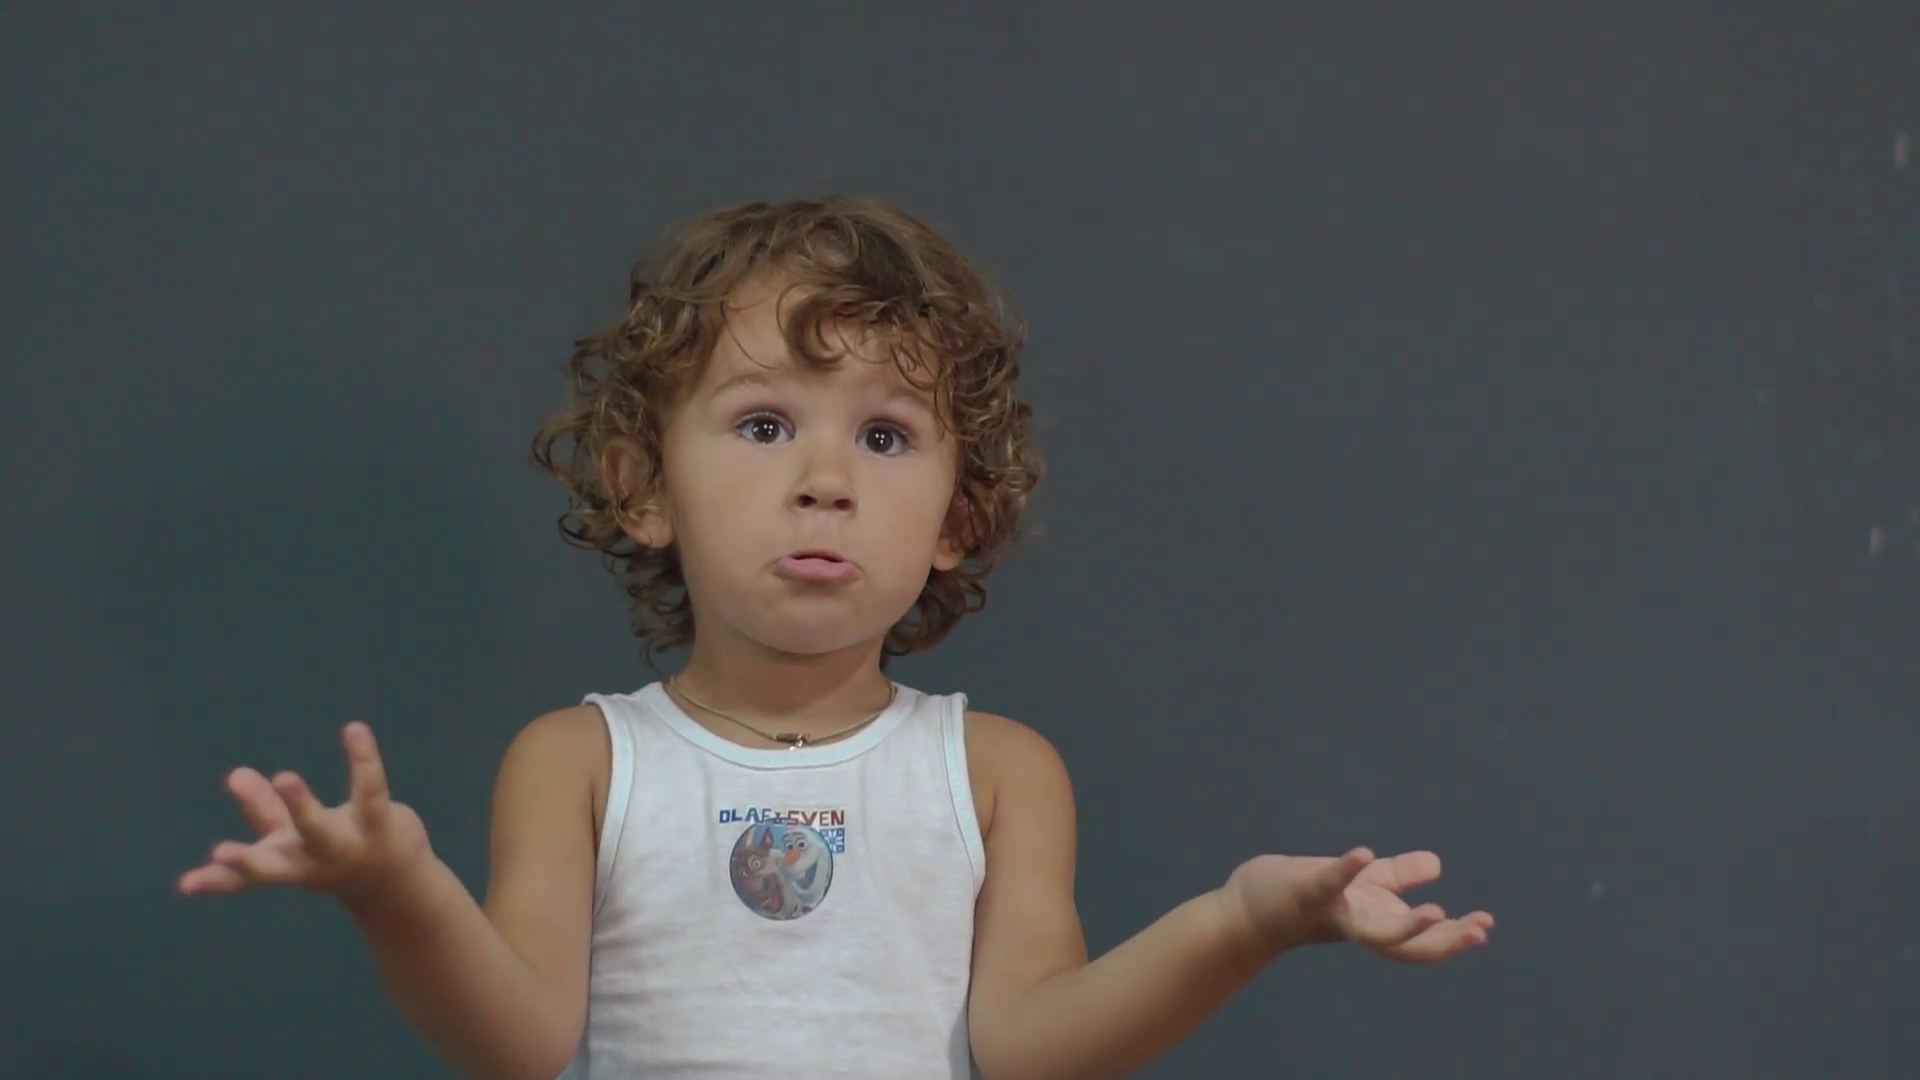 Confused little boy in white shirt gesture over grey background ...